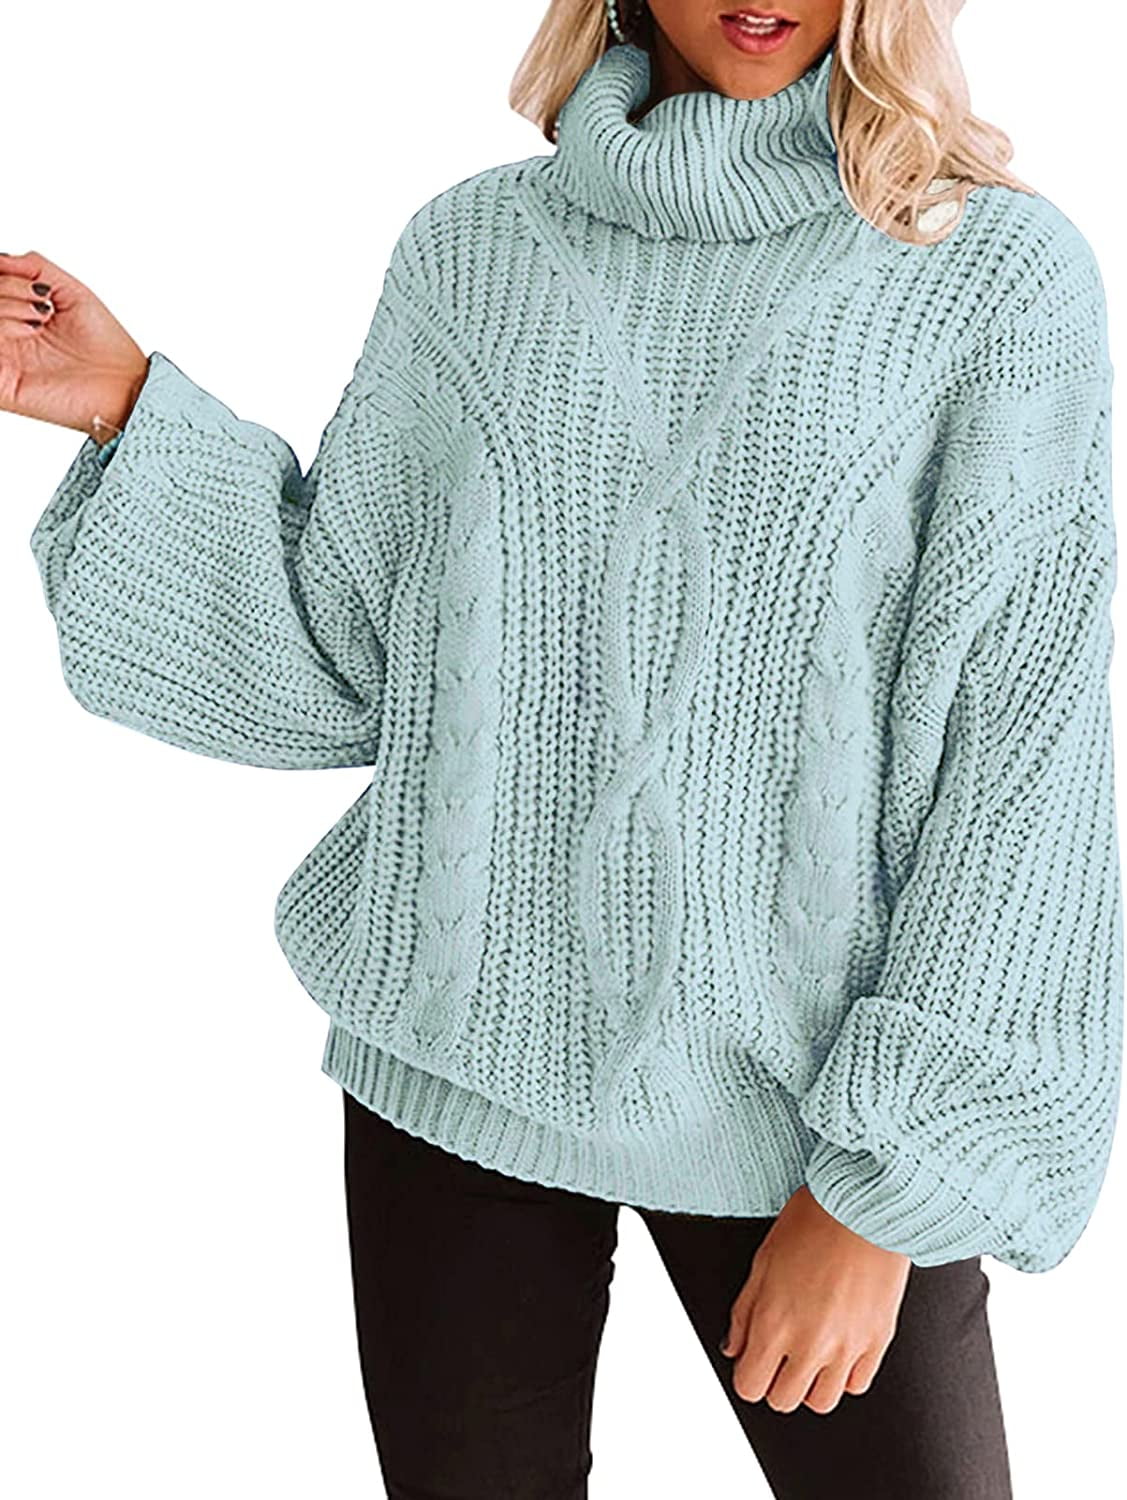 Our Featured Products Women's Turtle Neck Baggy Tops Chunky Knitted ...